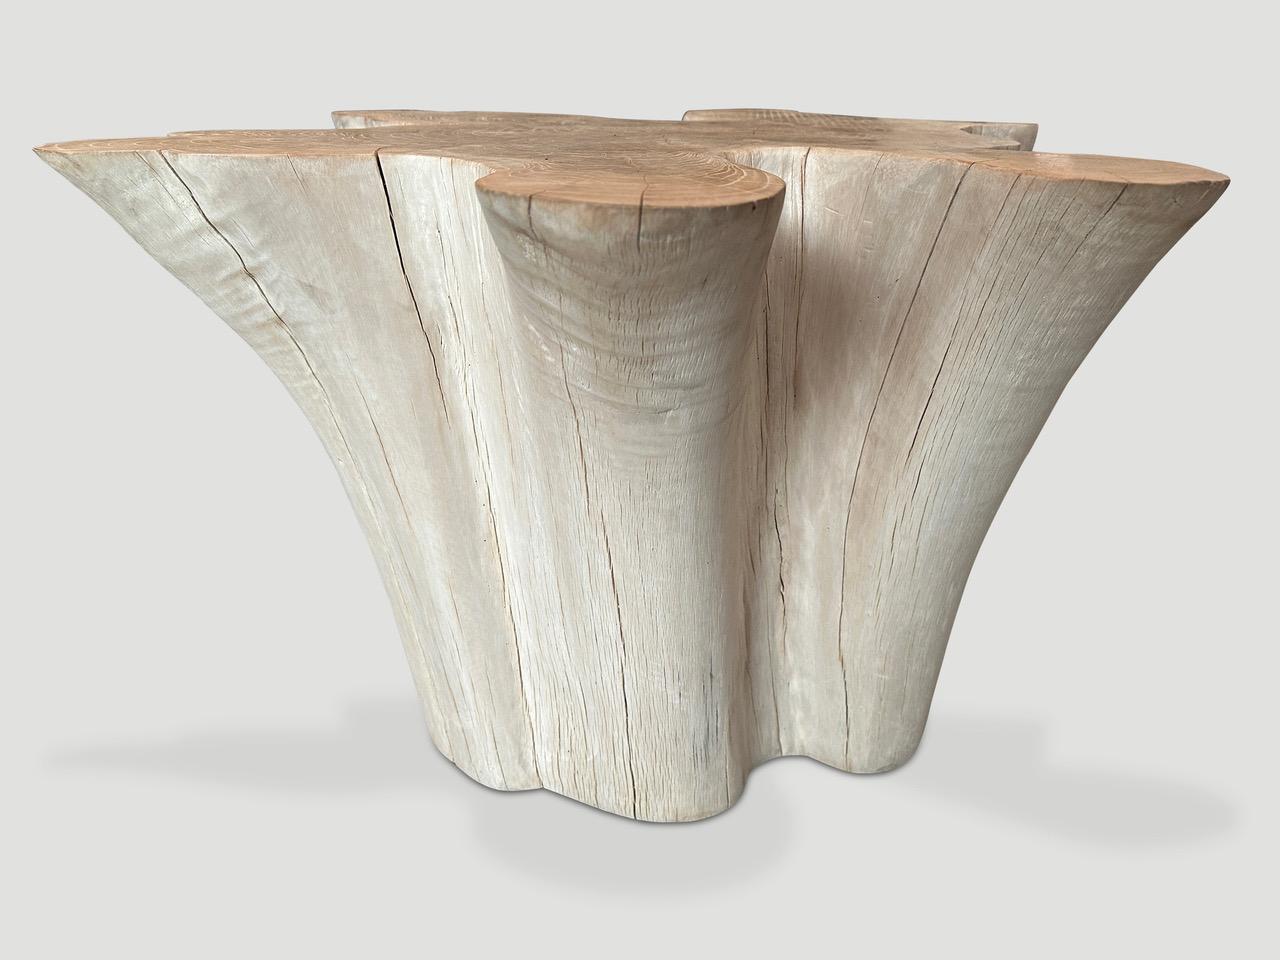 Andrianna Shamaris Amorphous Bleached Teak Wood Table In Excellent Condition For Sale In New York, NY